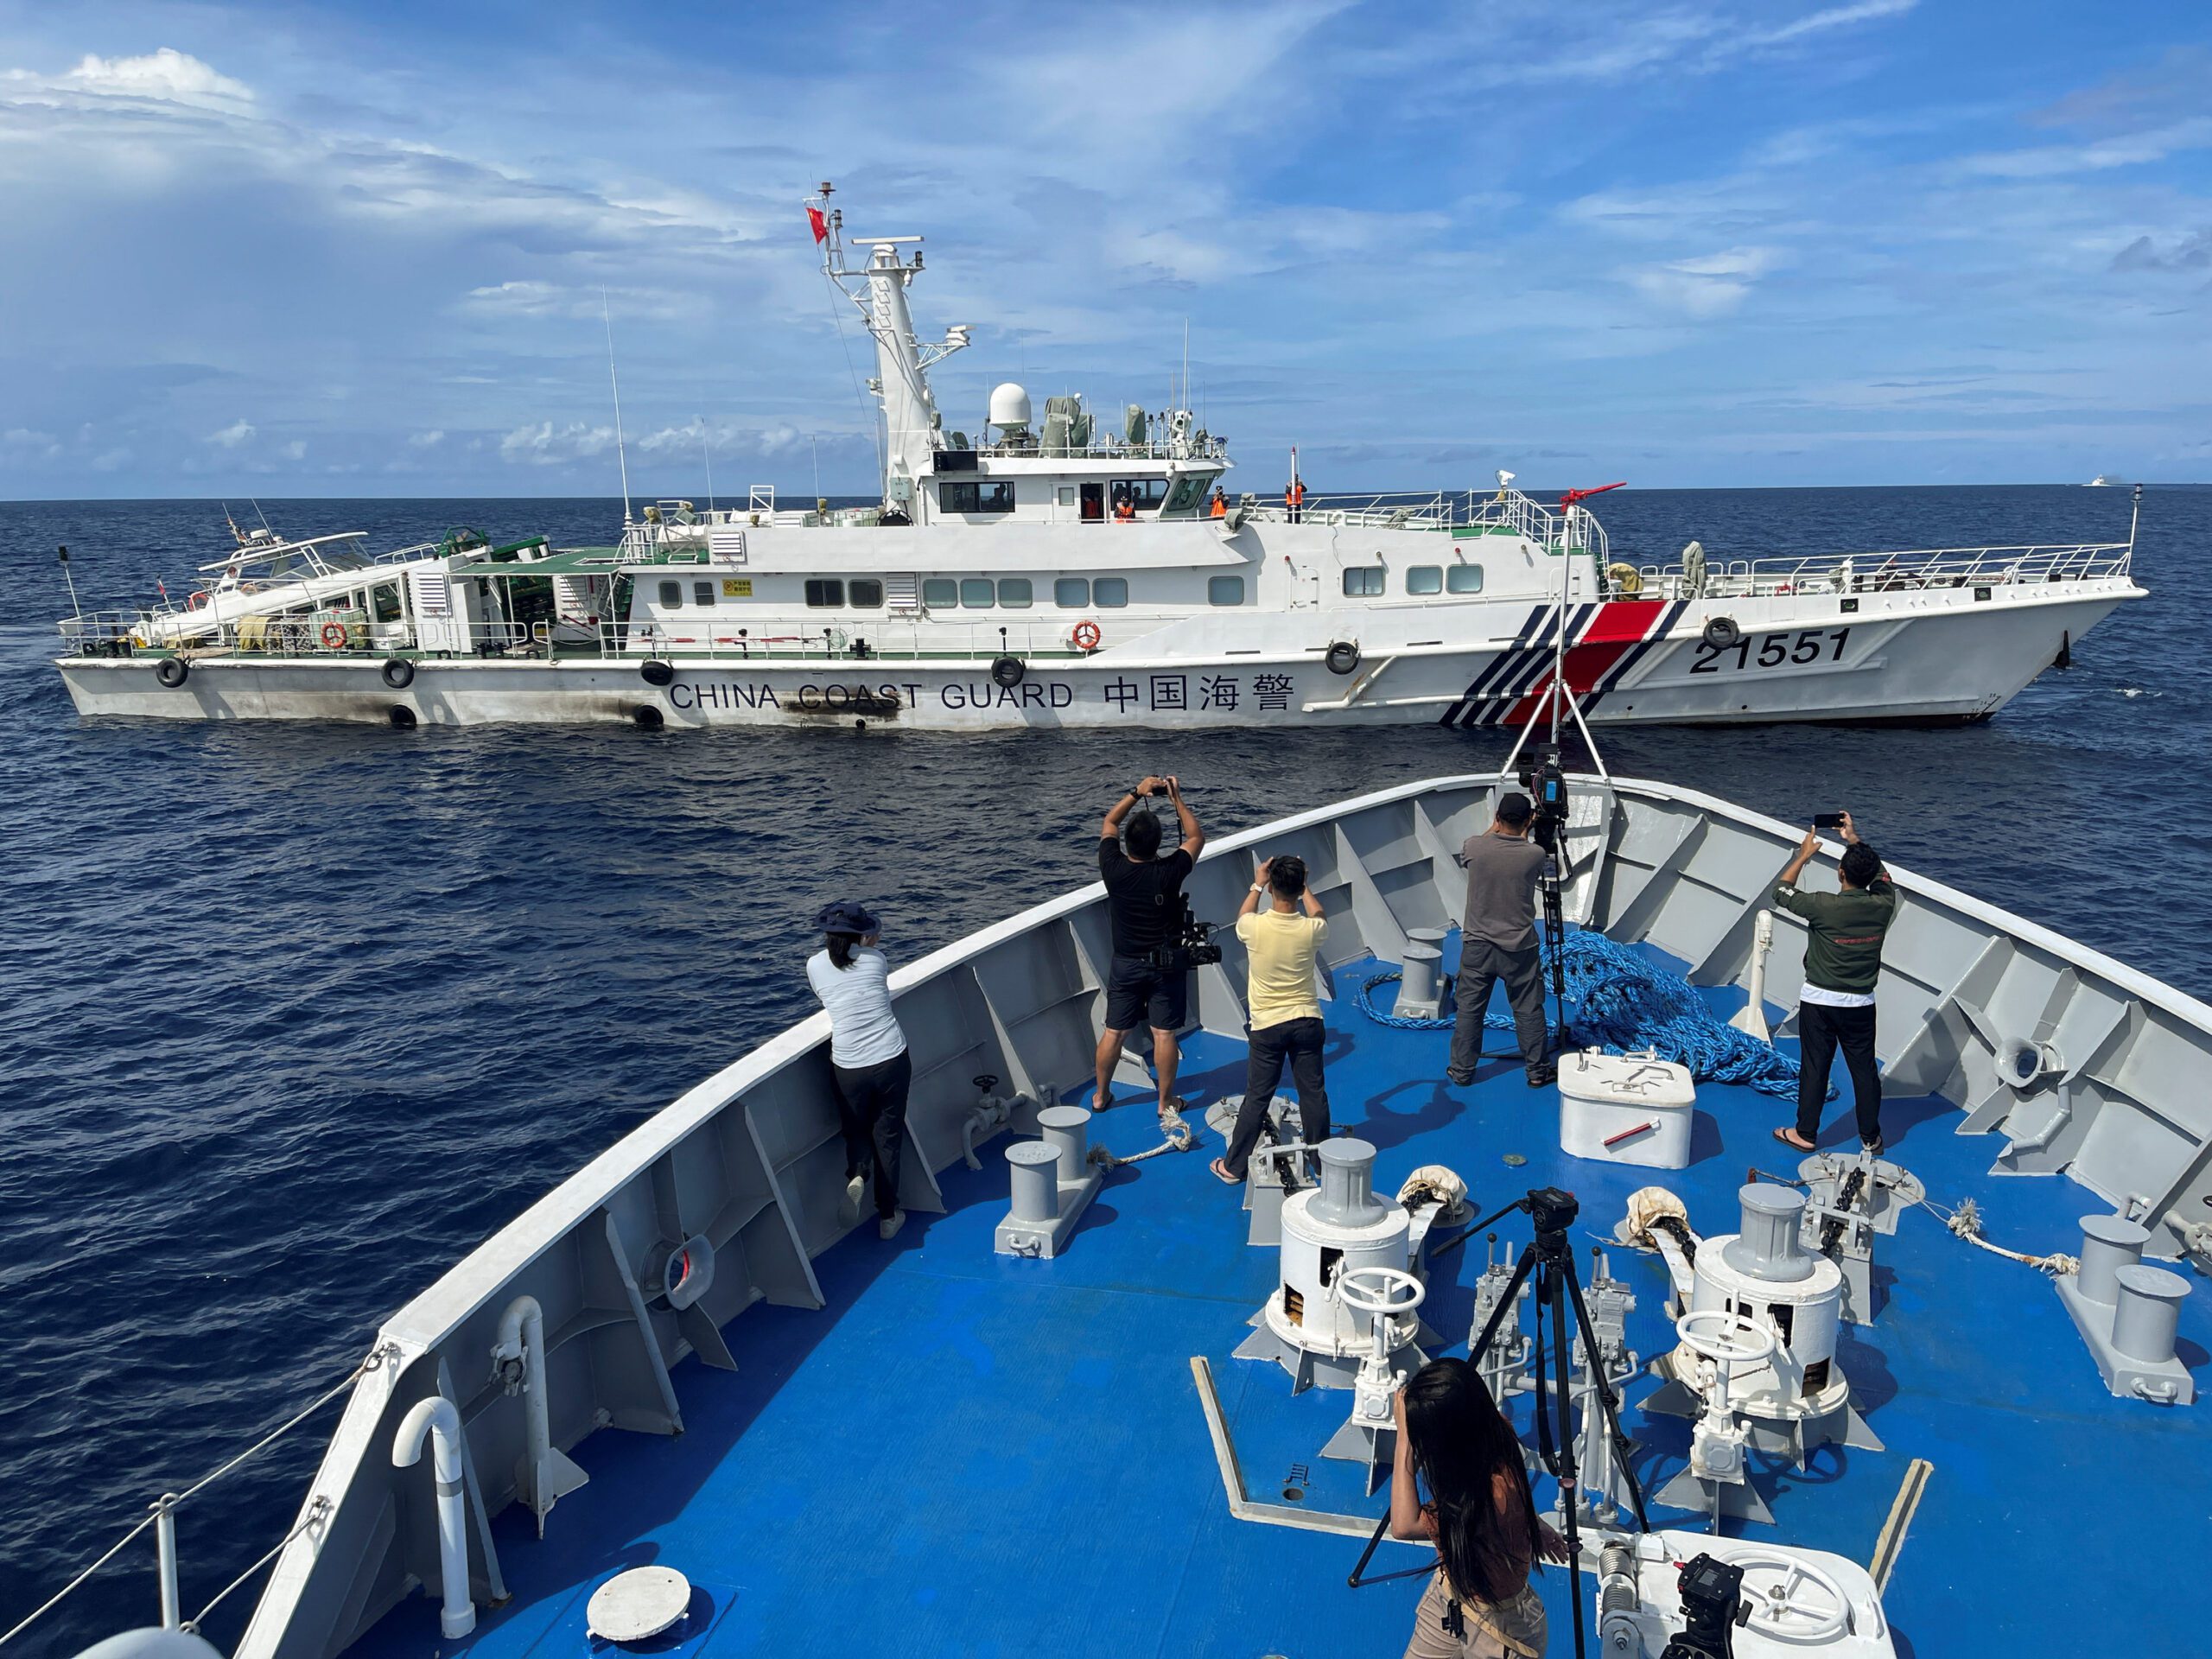 Chinese and Philippines Coast Guard boats face off